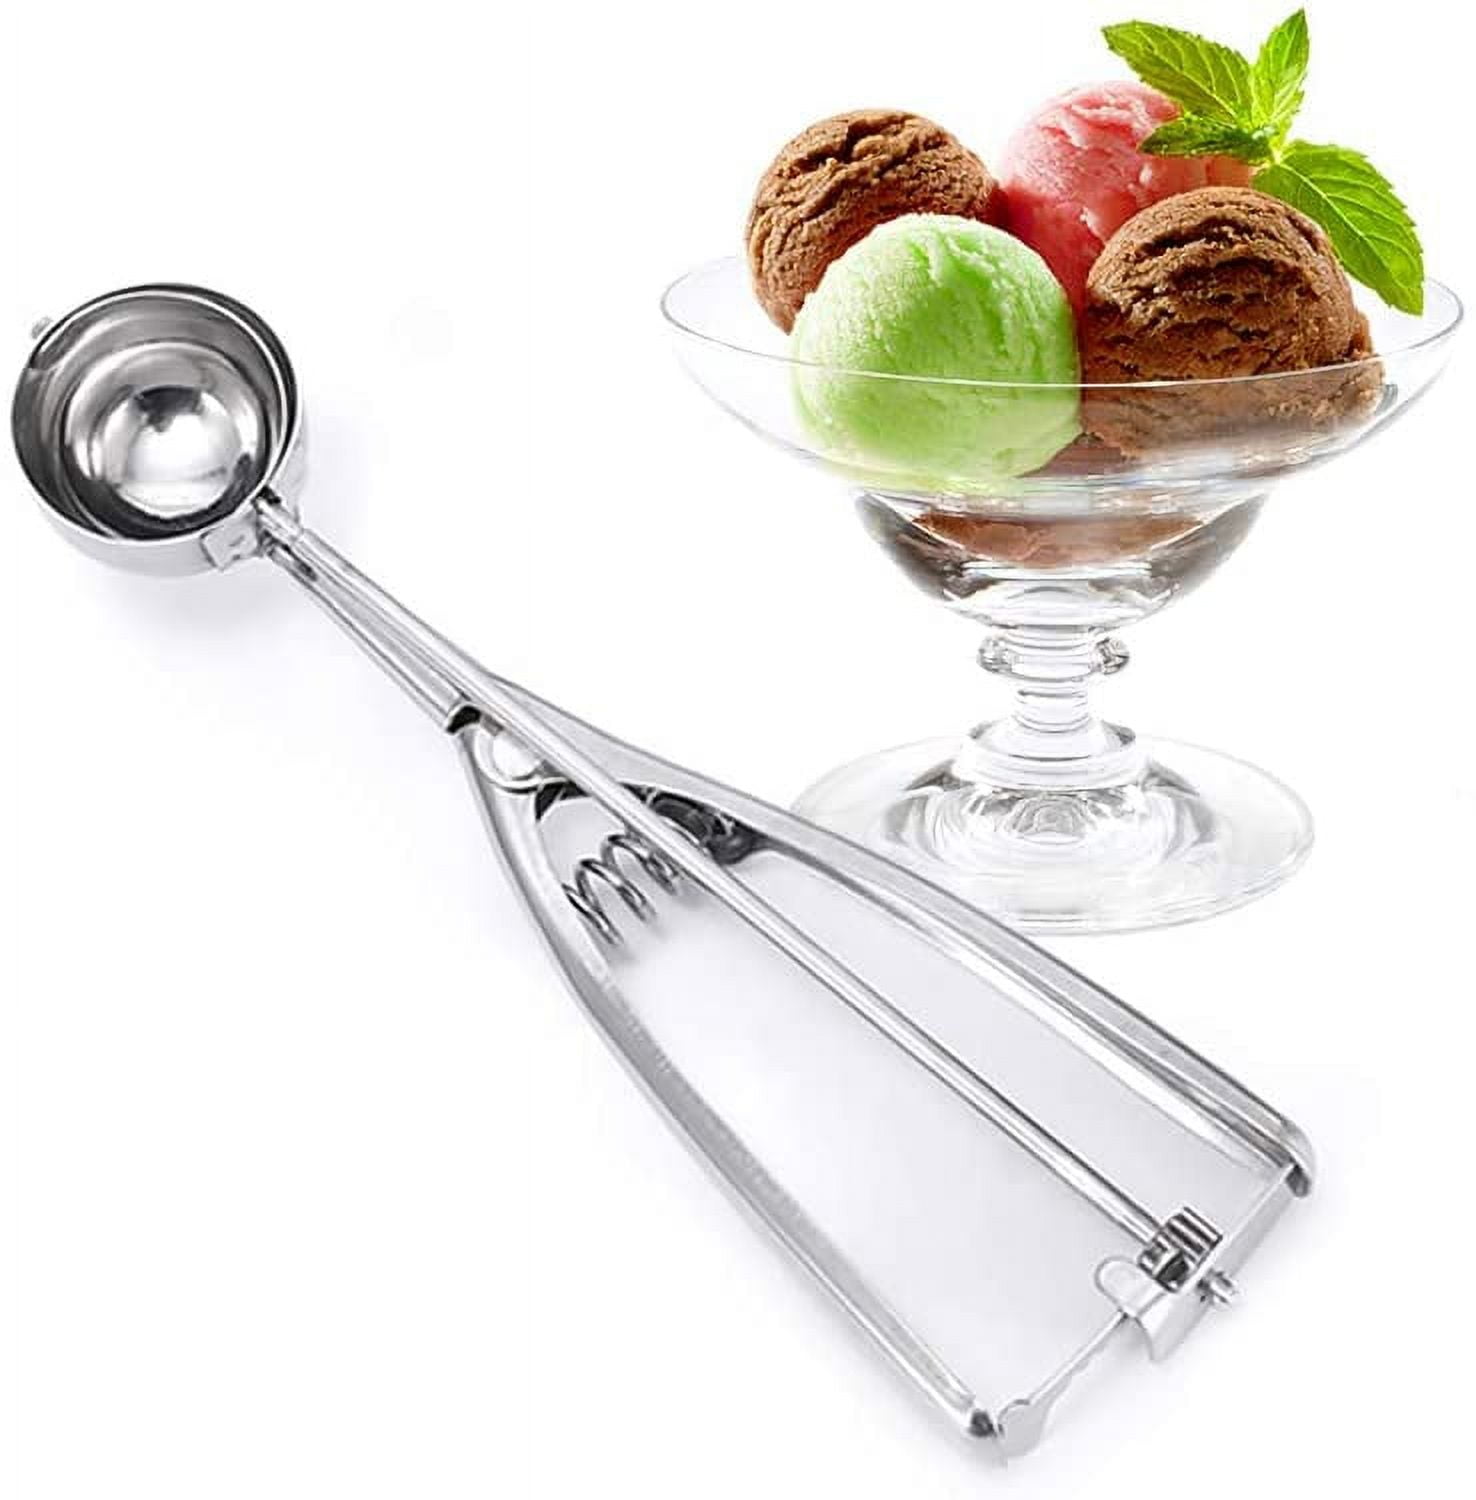 HUDAEN Cookie Scoop Set,Ice Cream Scoop Set,3 PCS Colorful Ice Cream Scoops  with Trigger Release Include Multiple Size Large-Medium-Small Size Portion